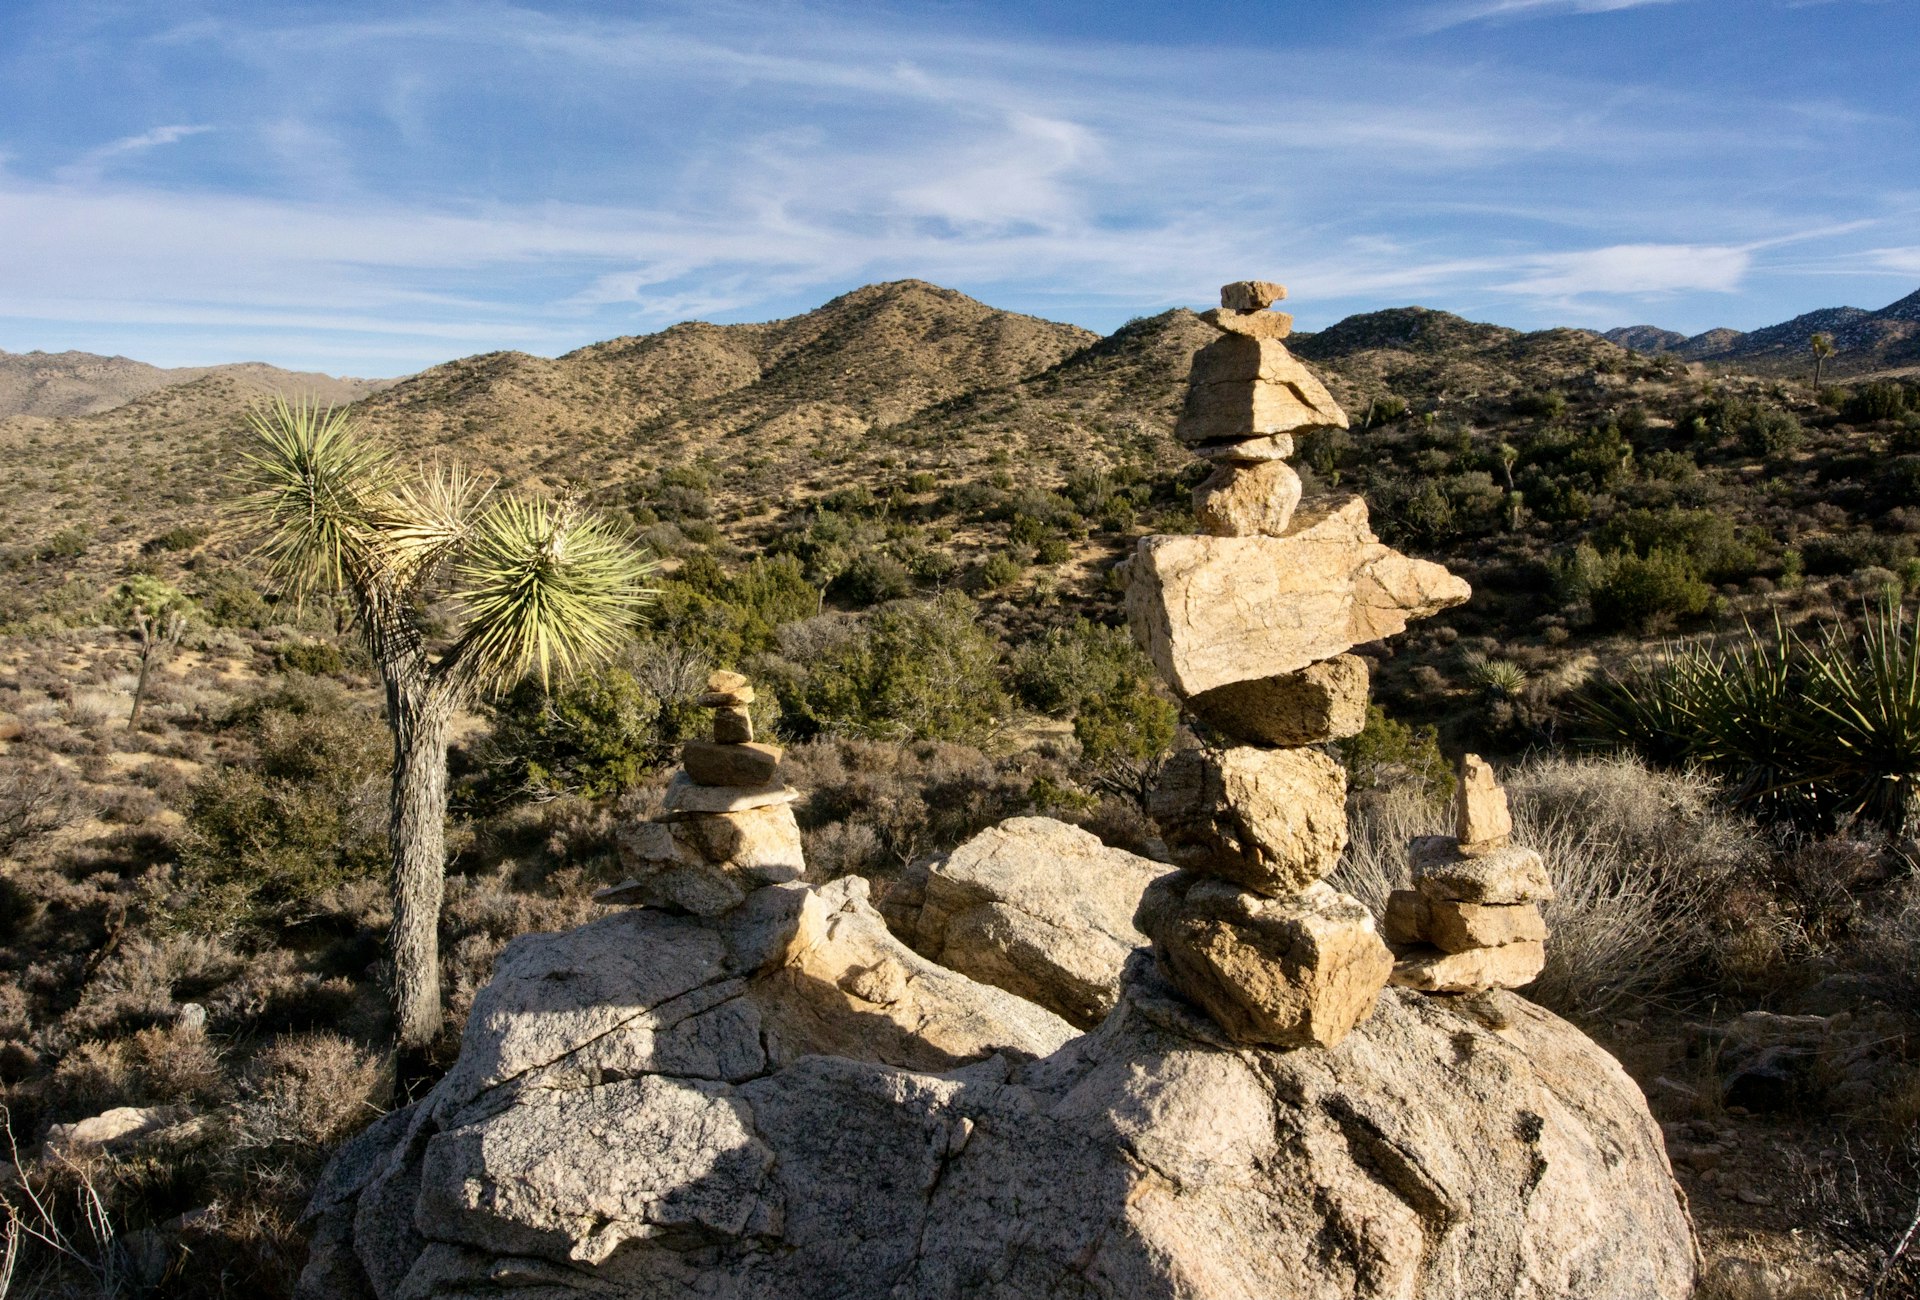 Close-up of rock cairns created by visitors in Joshua Tree National Park